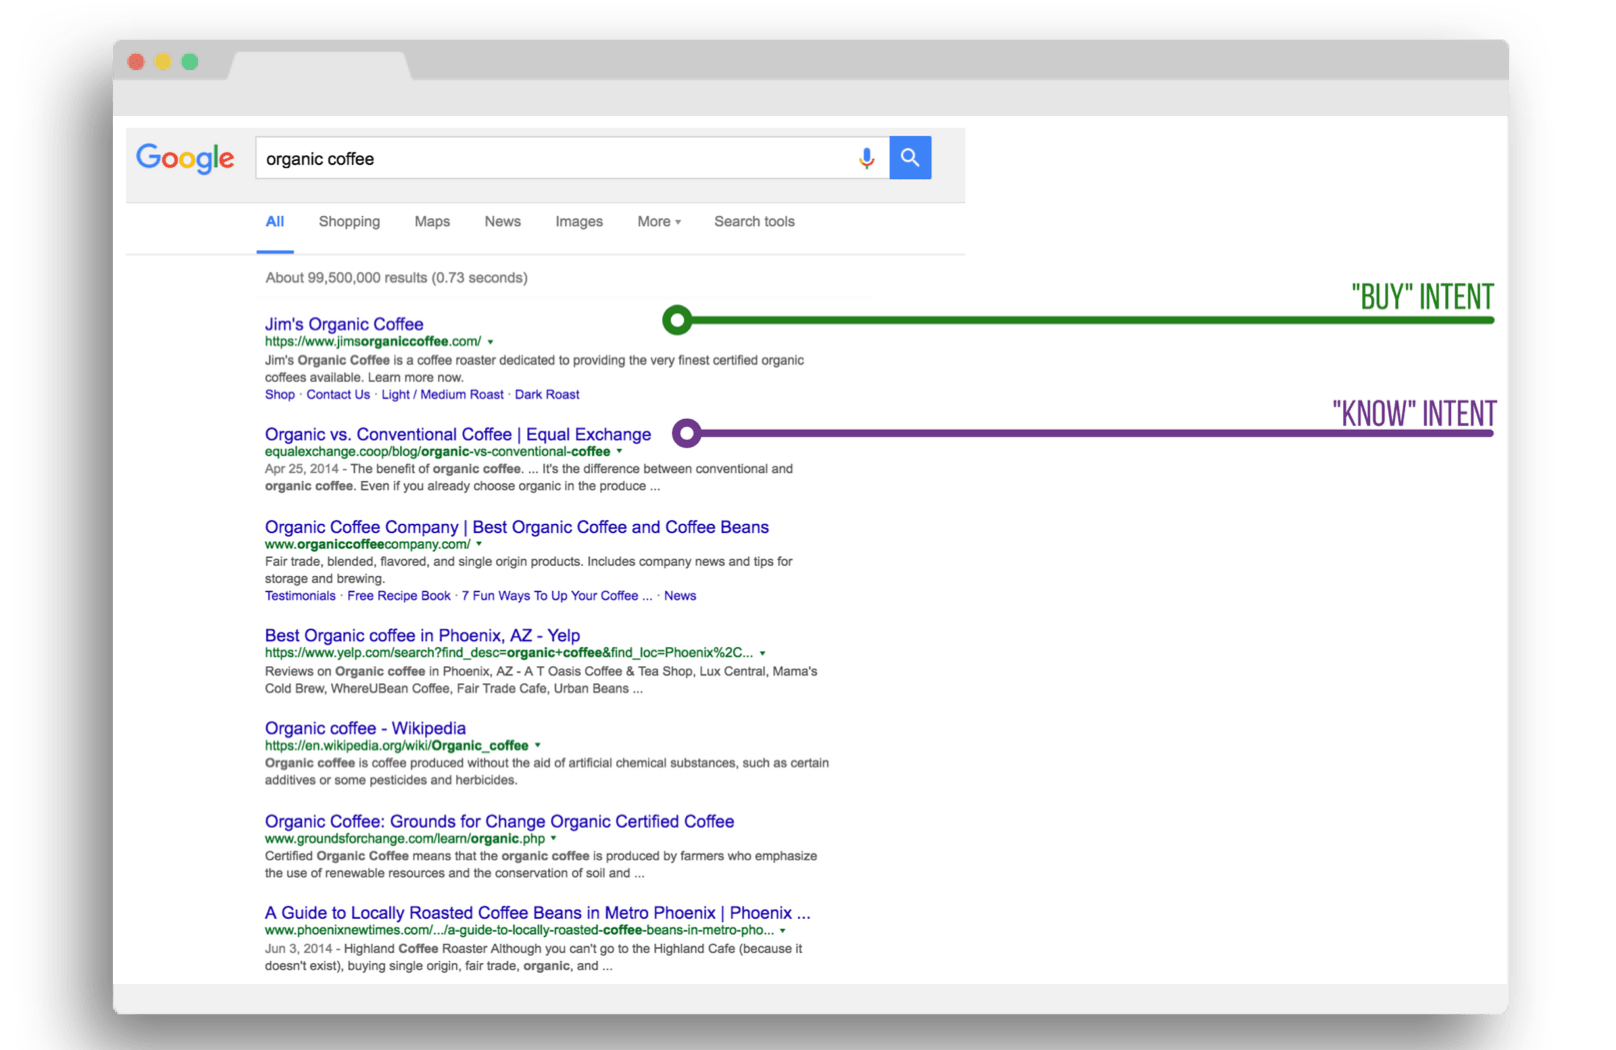 Google search result page